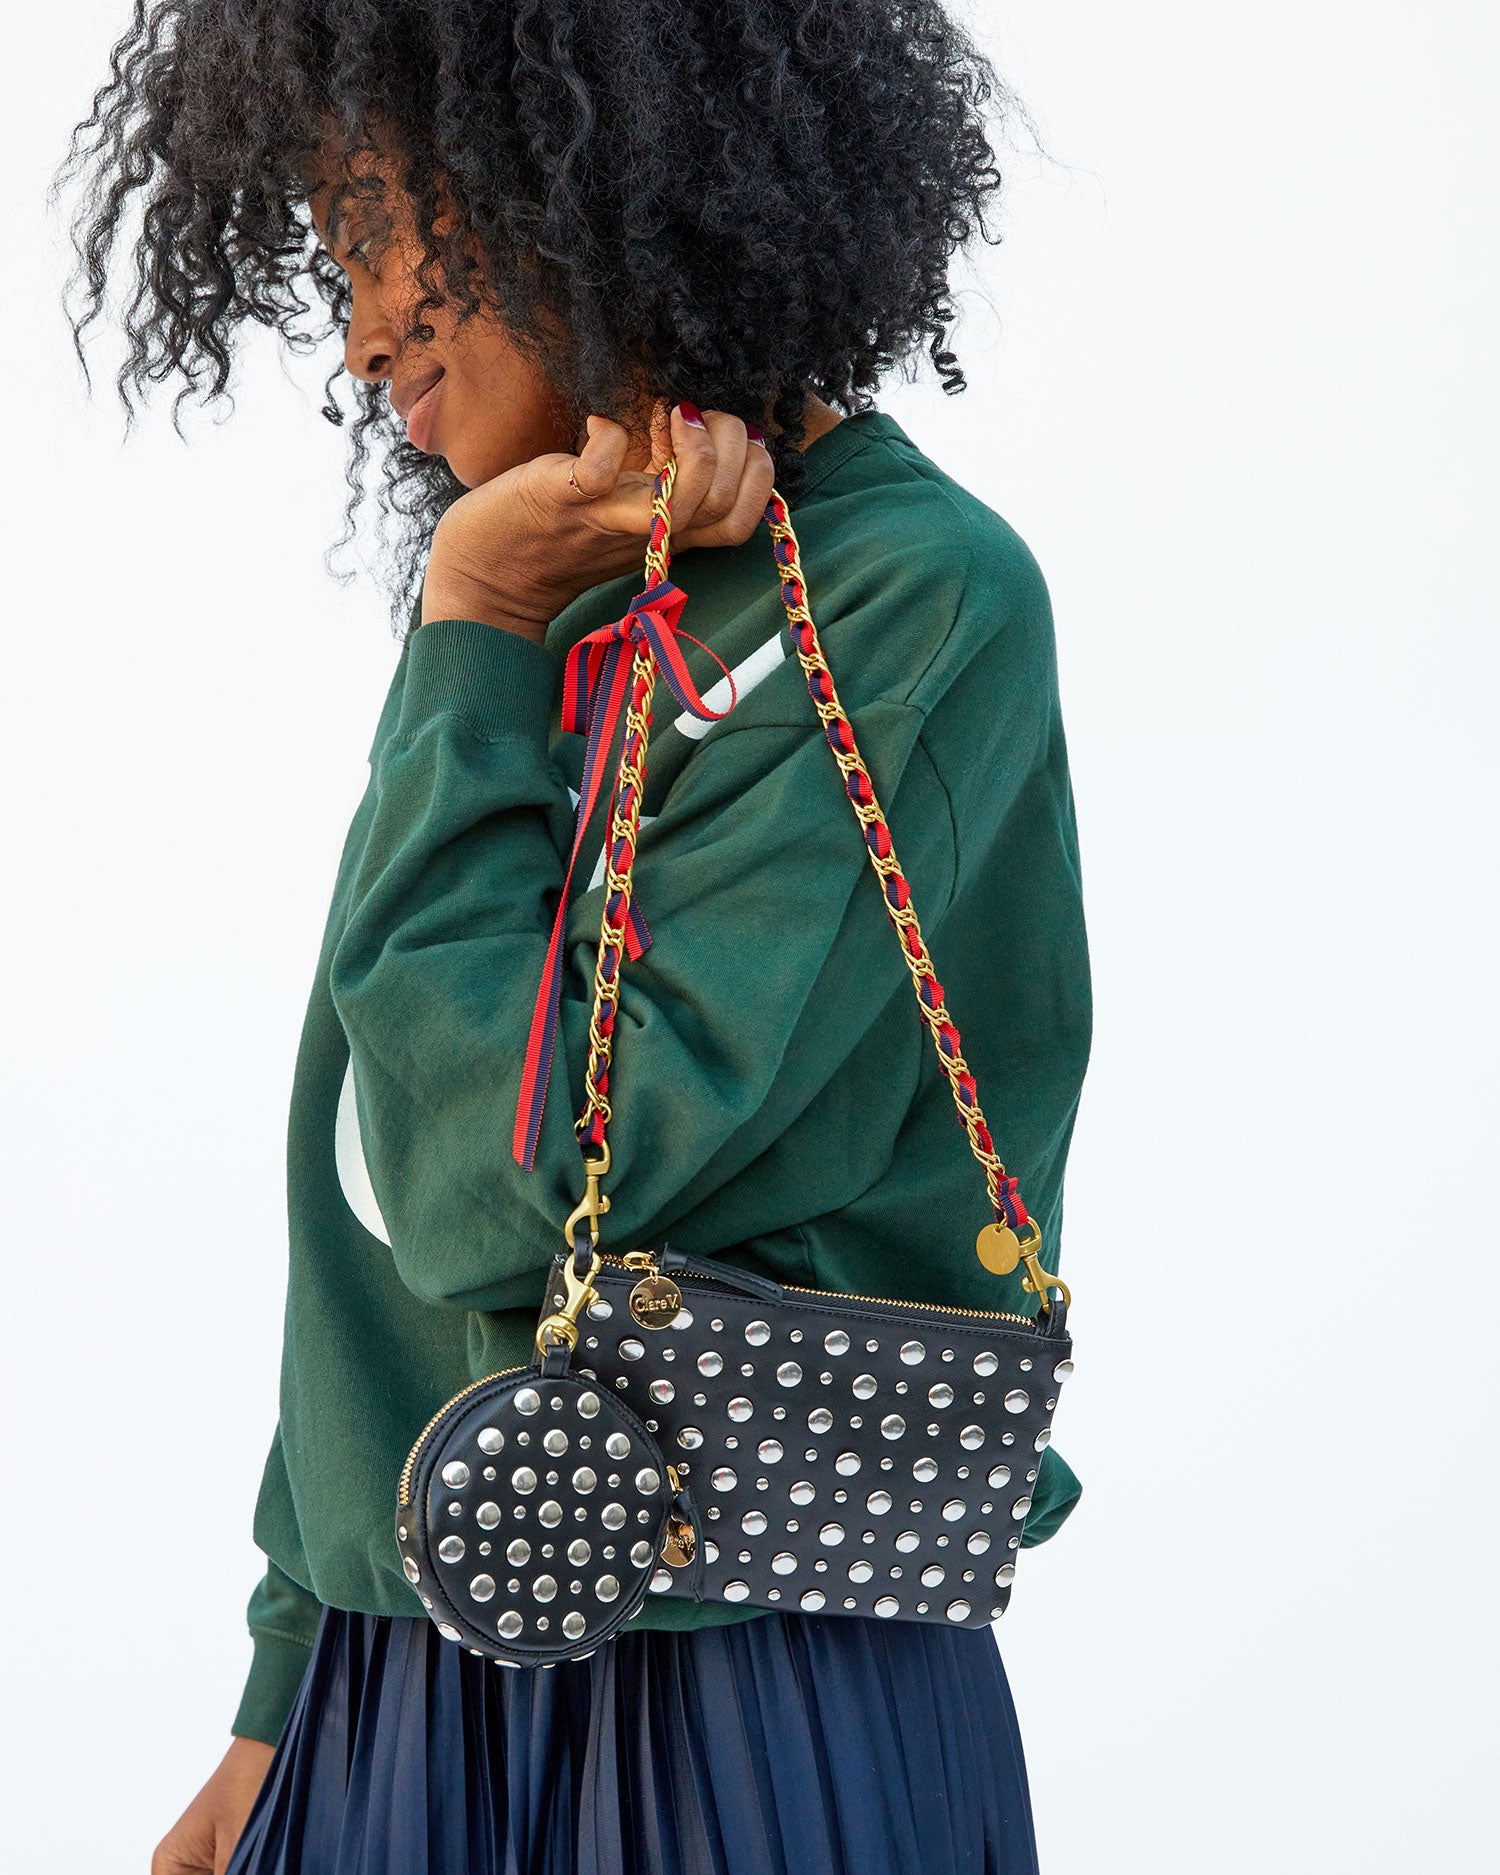 Mecca carrying the black with studs wallet clutch with tabs by the Navy/Red Grosgrain Chain Shoulder Strap